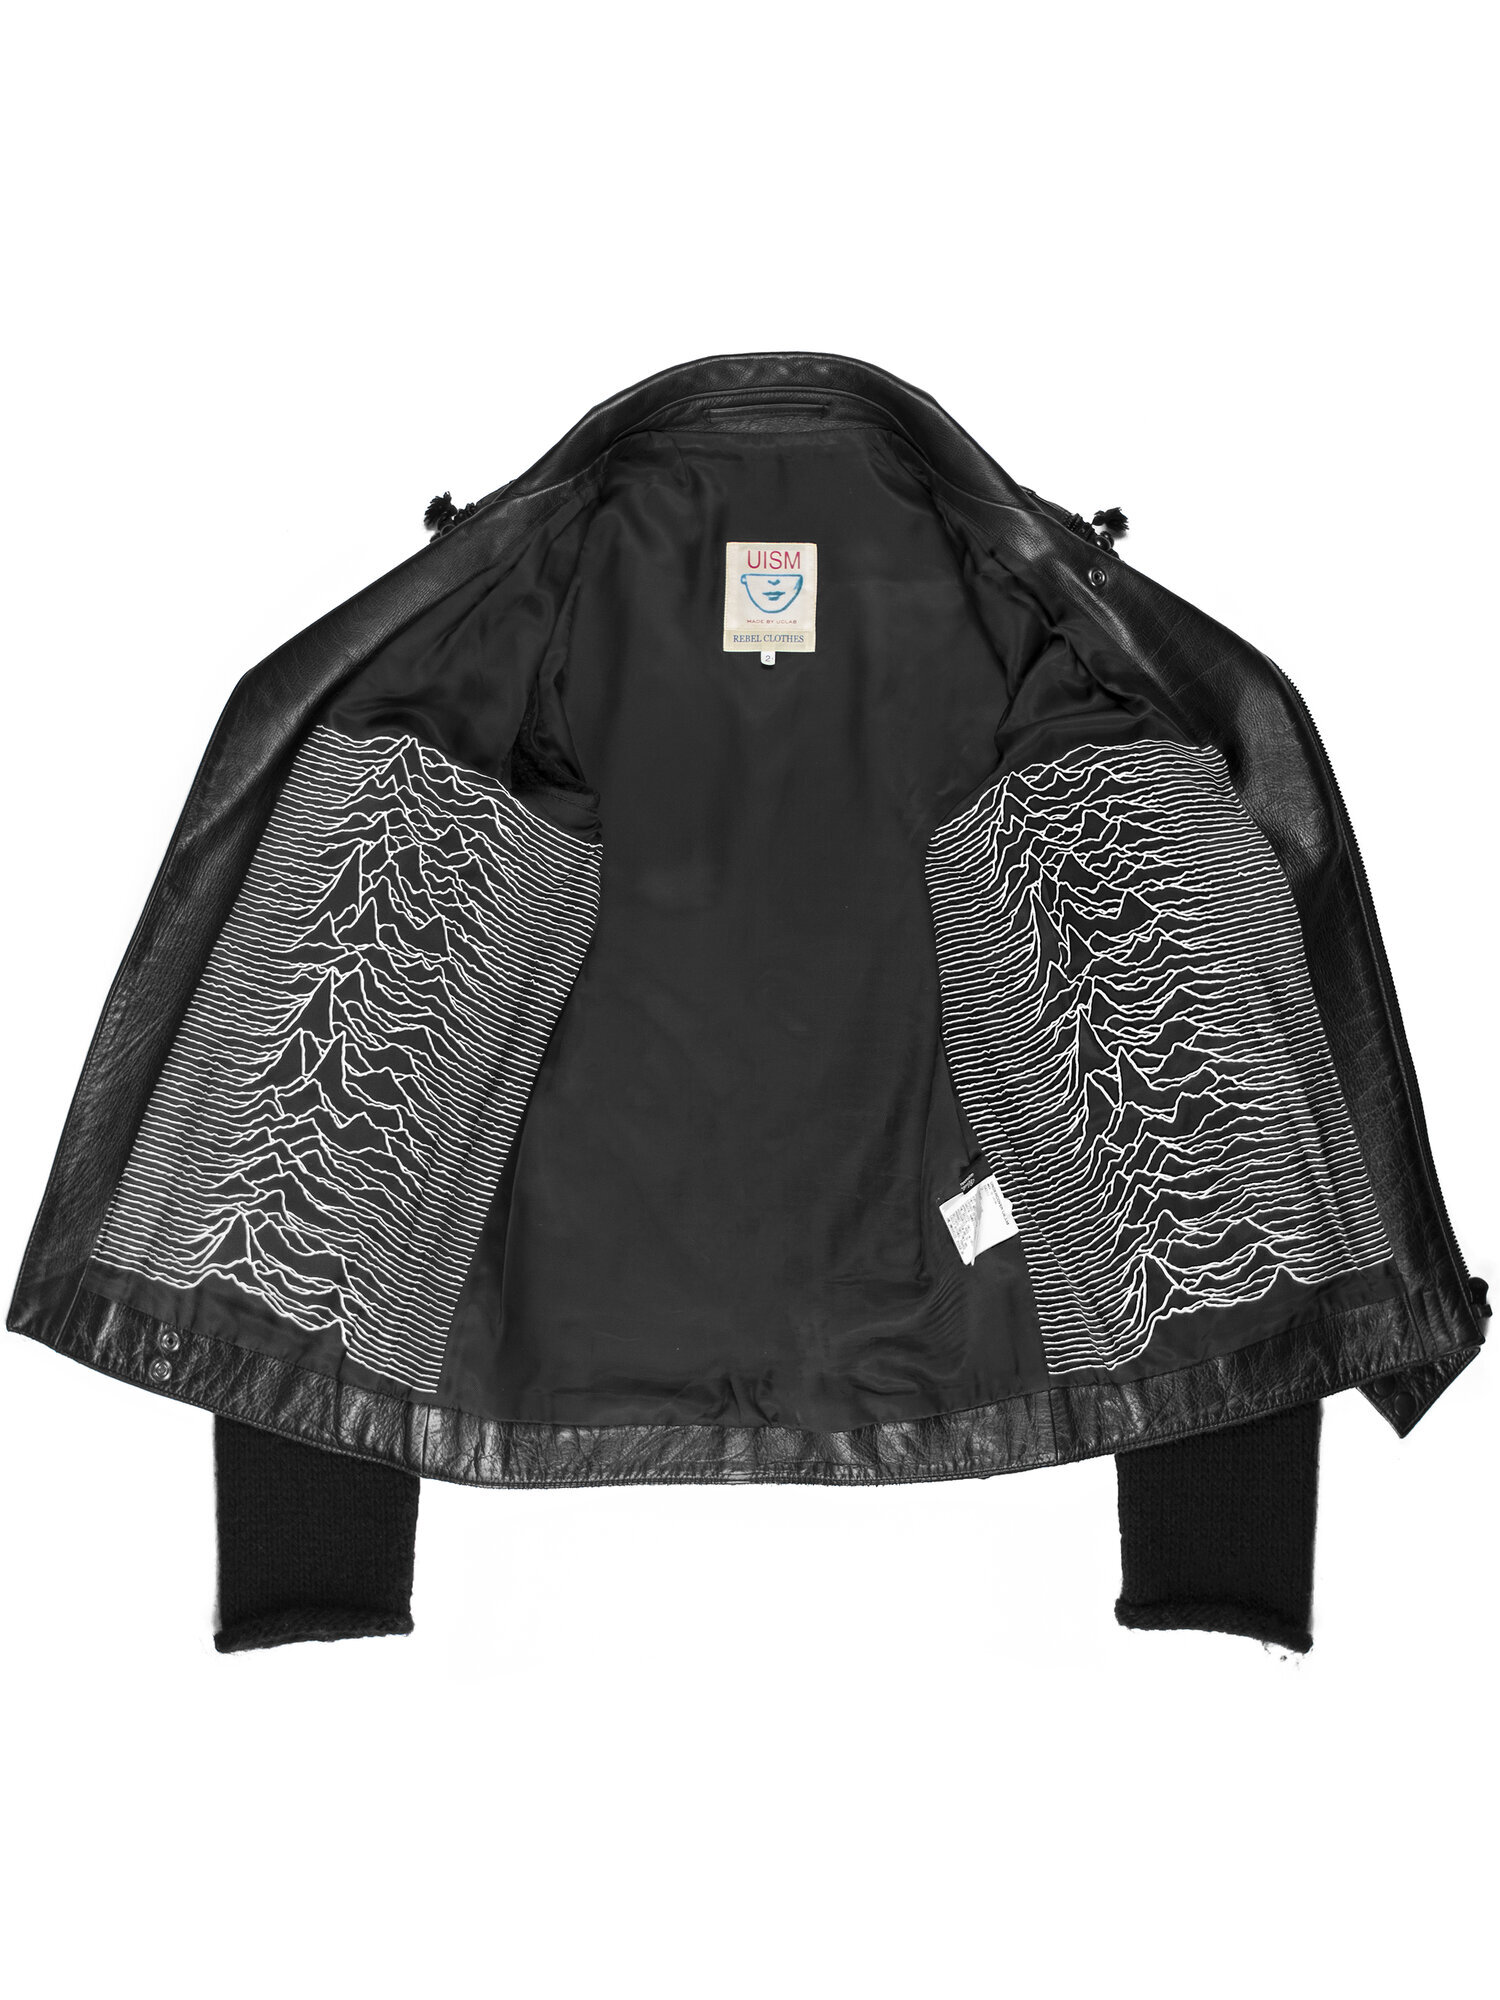 Undercover AW2009 Ethnic Rider Jacket — Middleman Store